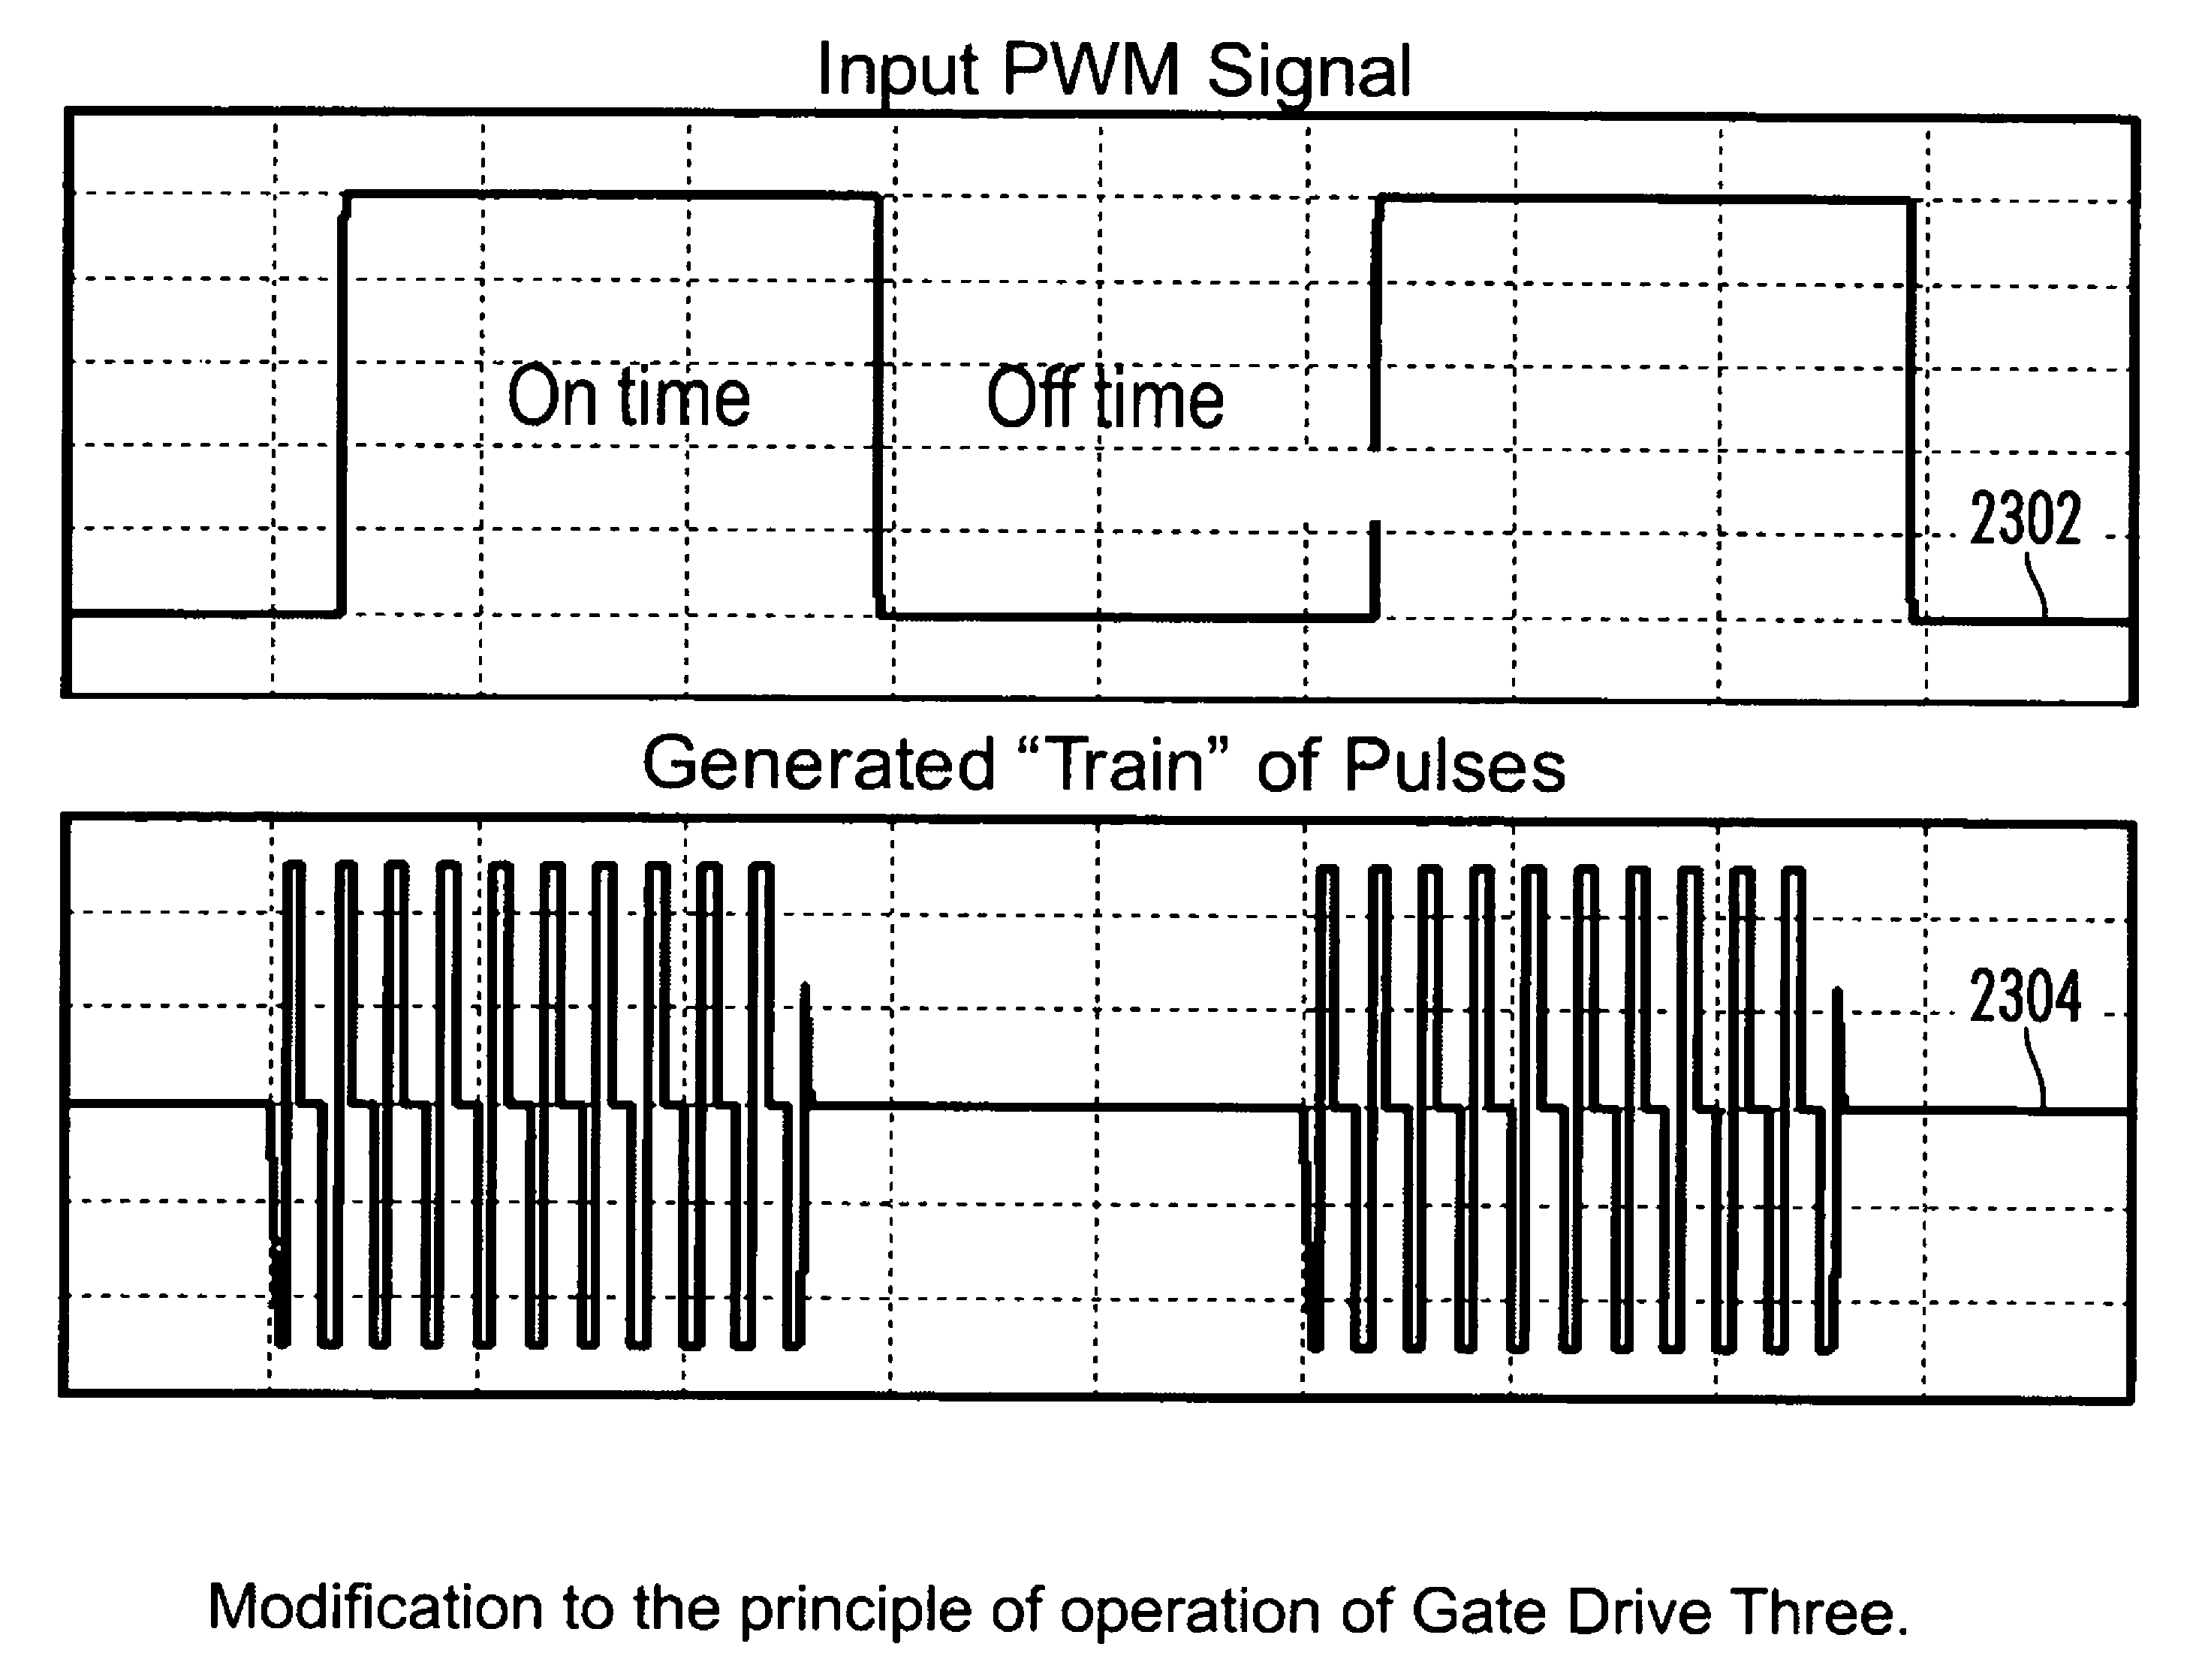 Low-loss noise-resistant high-temperature gate driver circuits